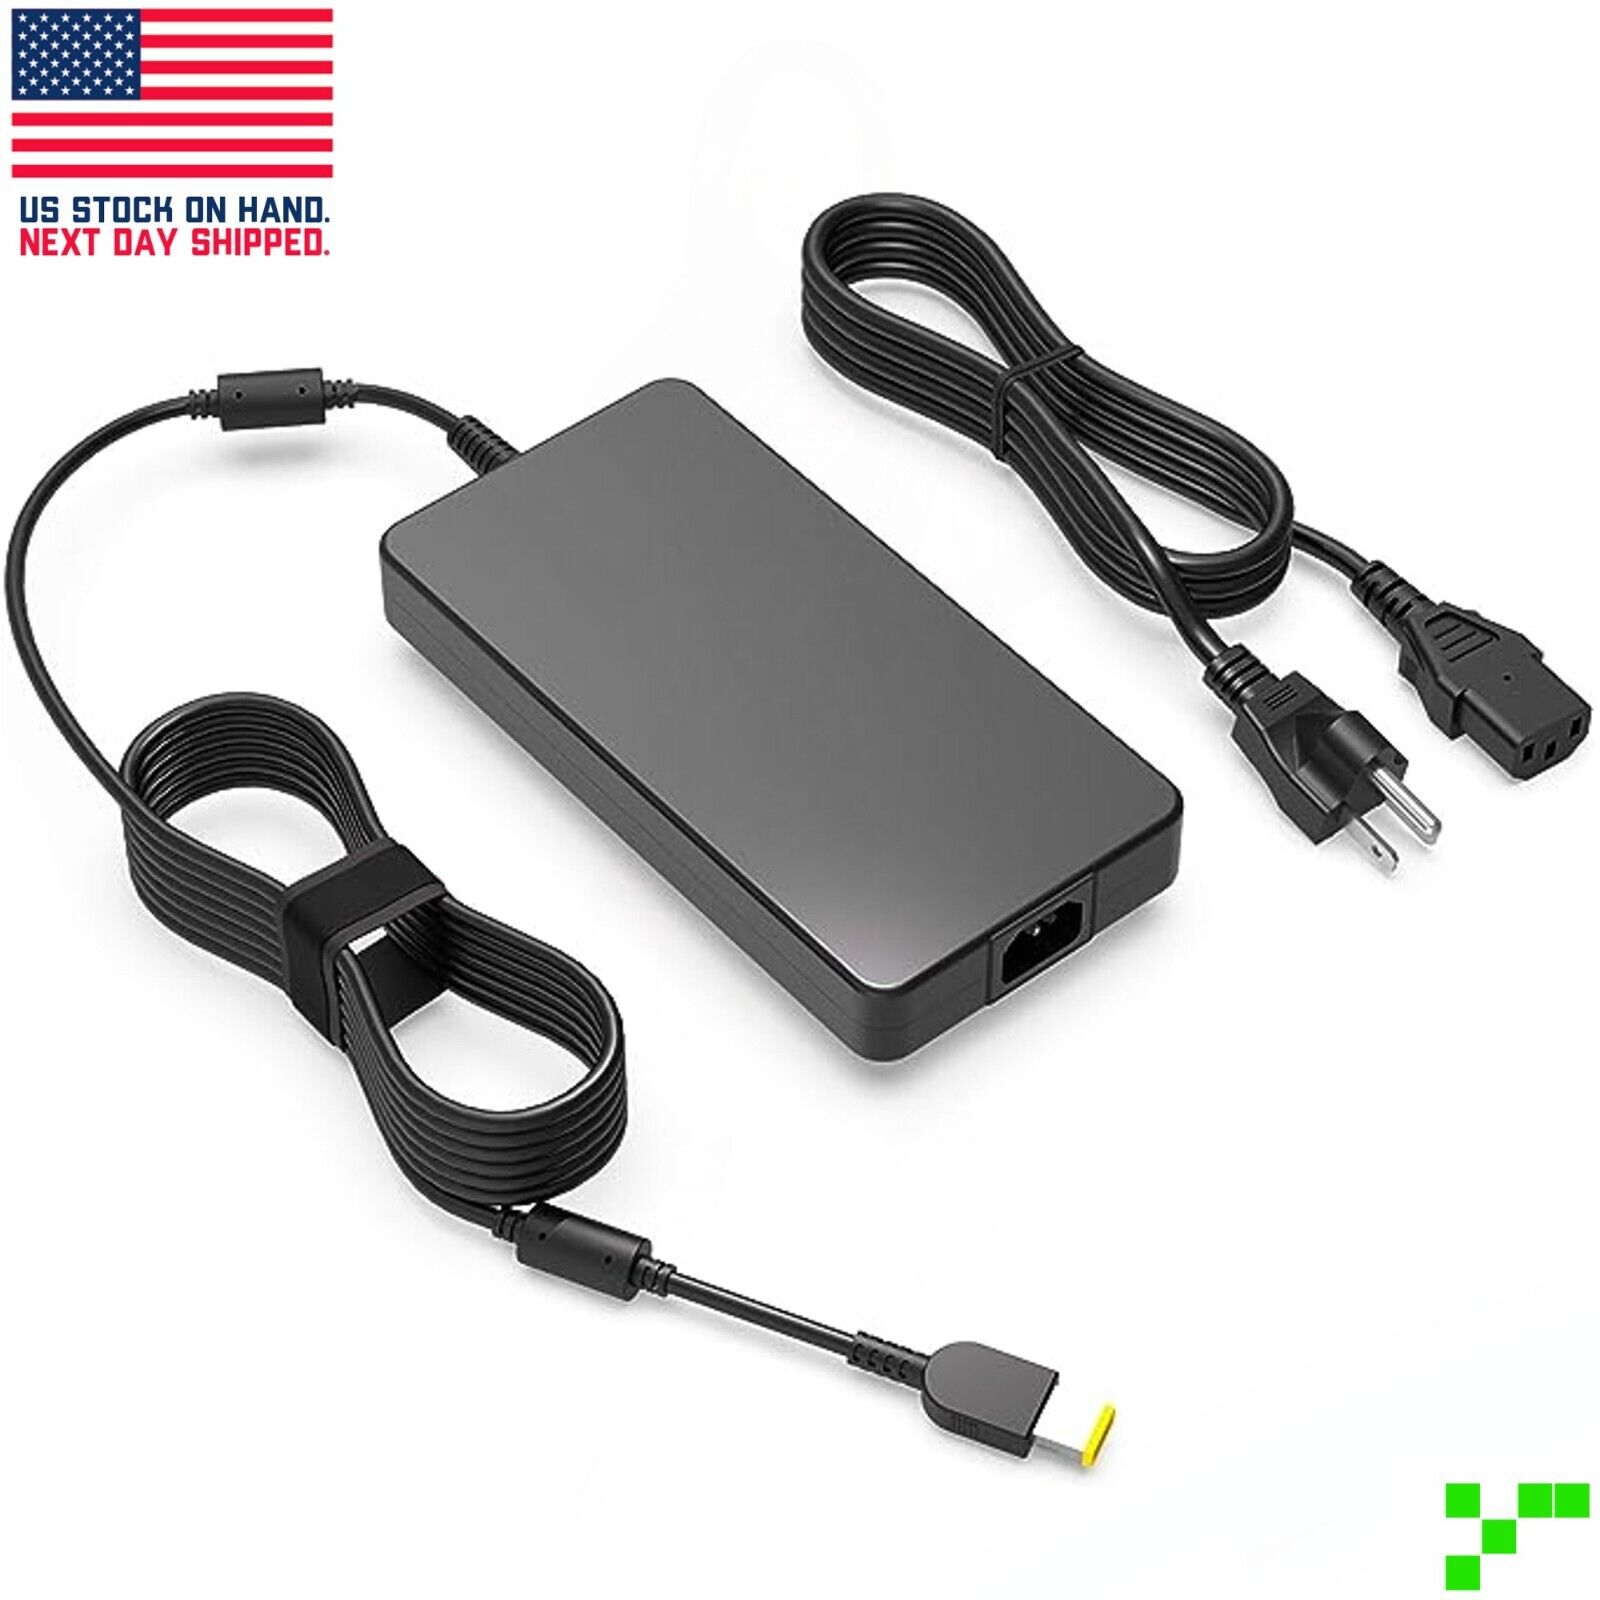 230W AC Charger Adapter For Lenovo Legion 5 5i 7 7i Gaming Laptop Power Supply